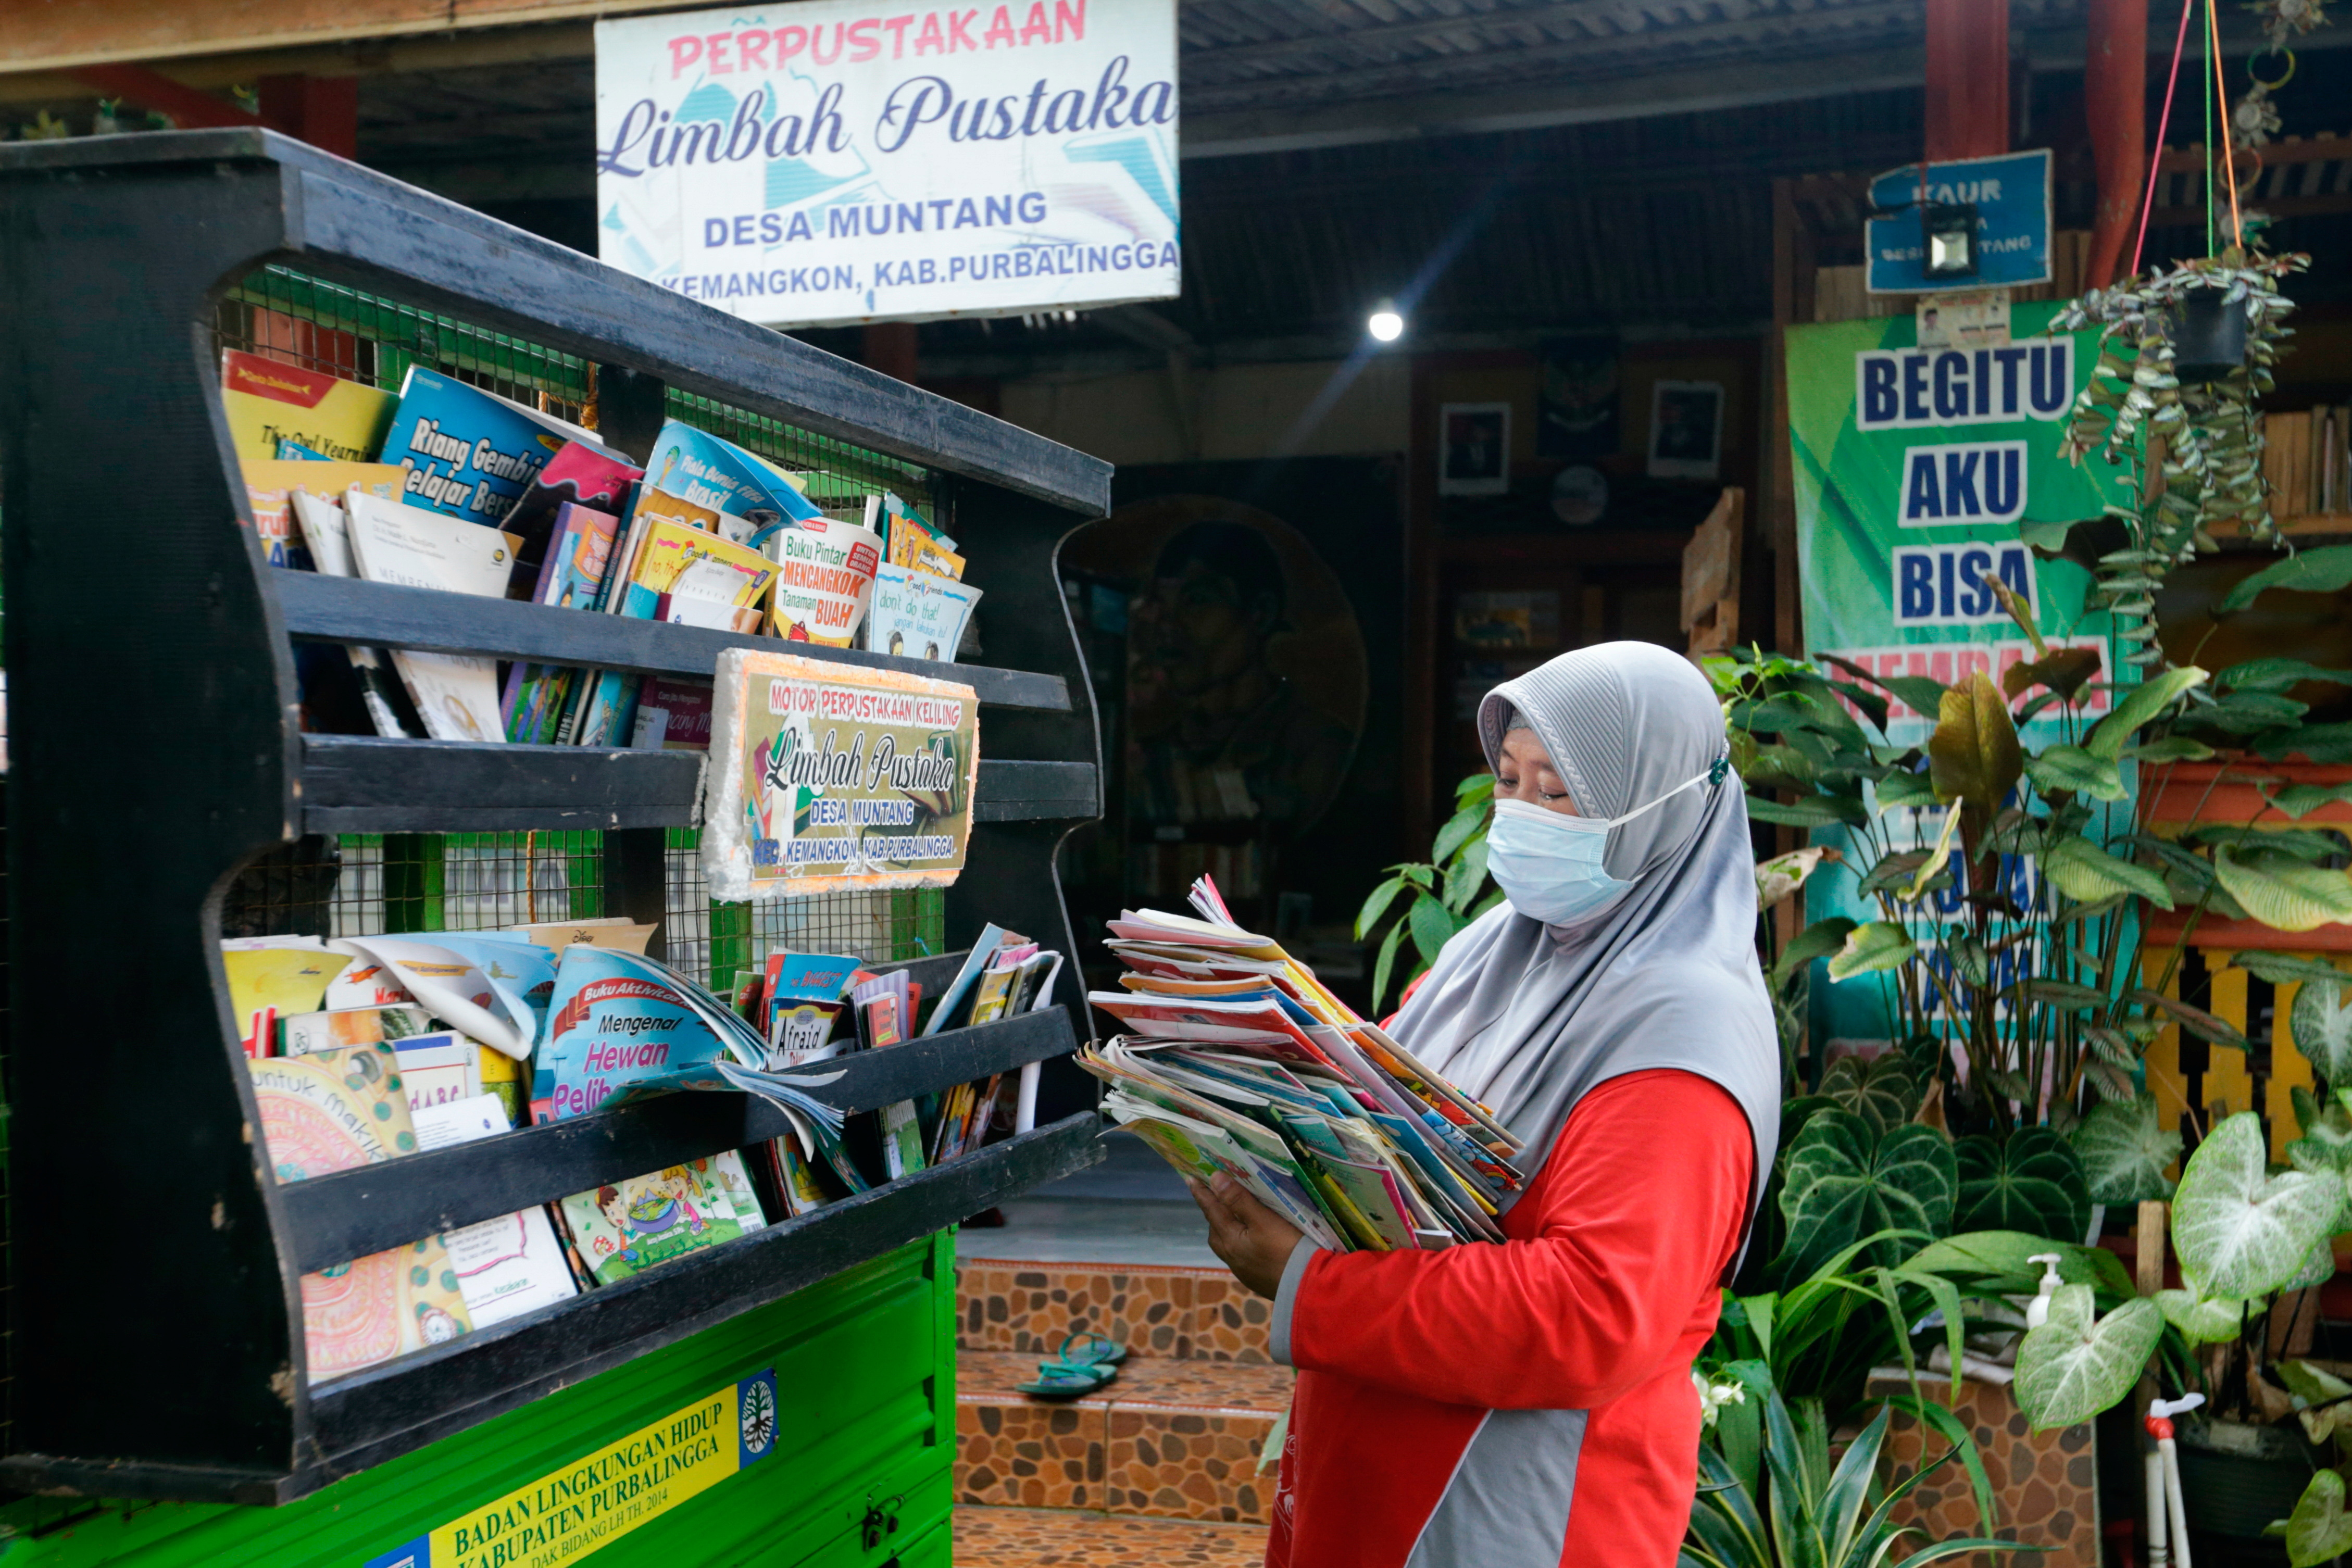 Founder of the waste library (Limbah Pustaka), Raden Roro Hendarti arranges books on a three-wheeler vehicle at the library in Muntang village